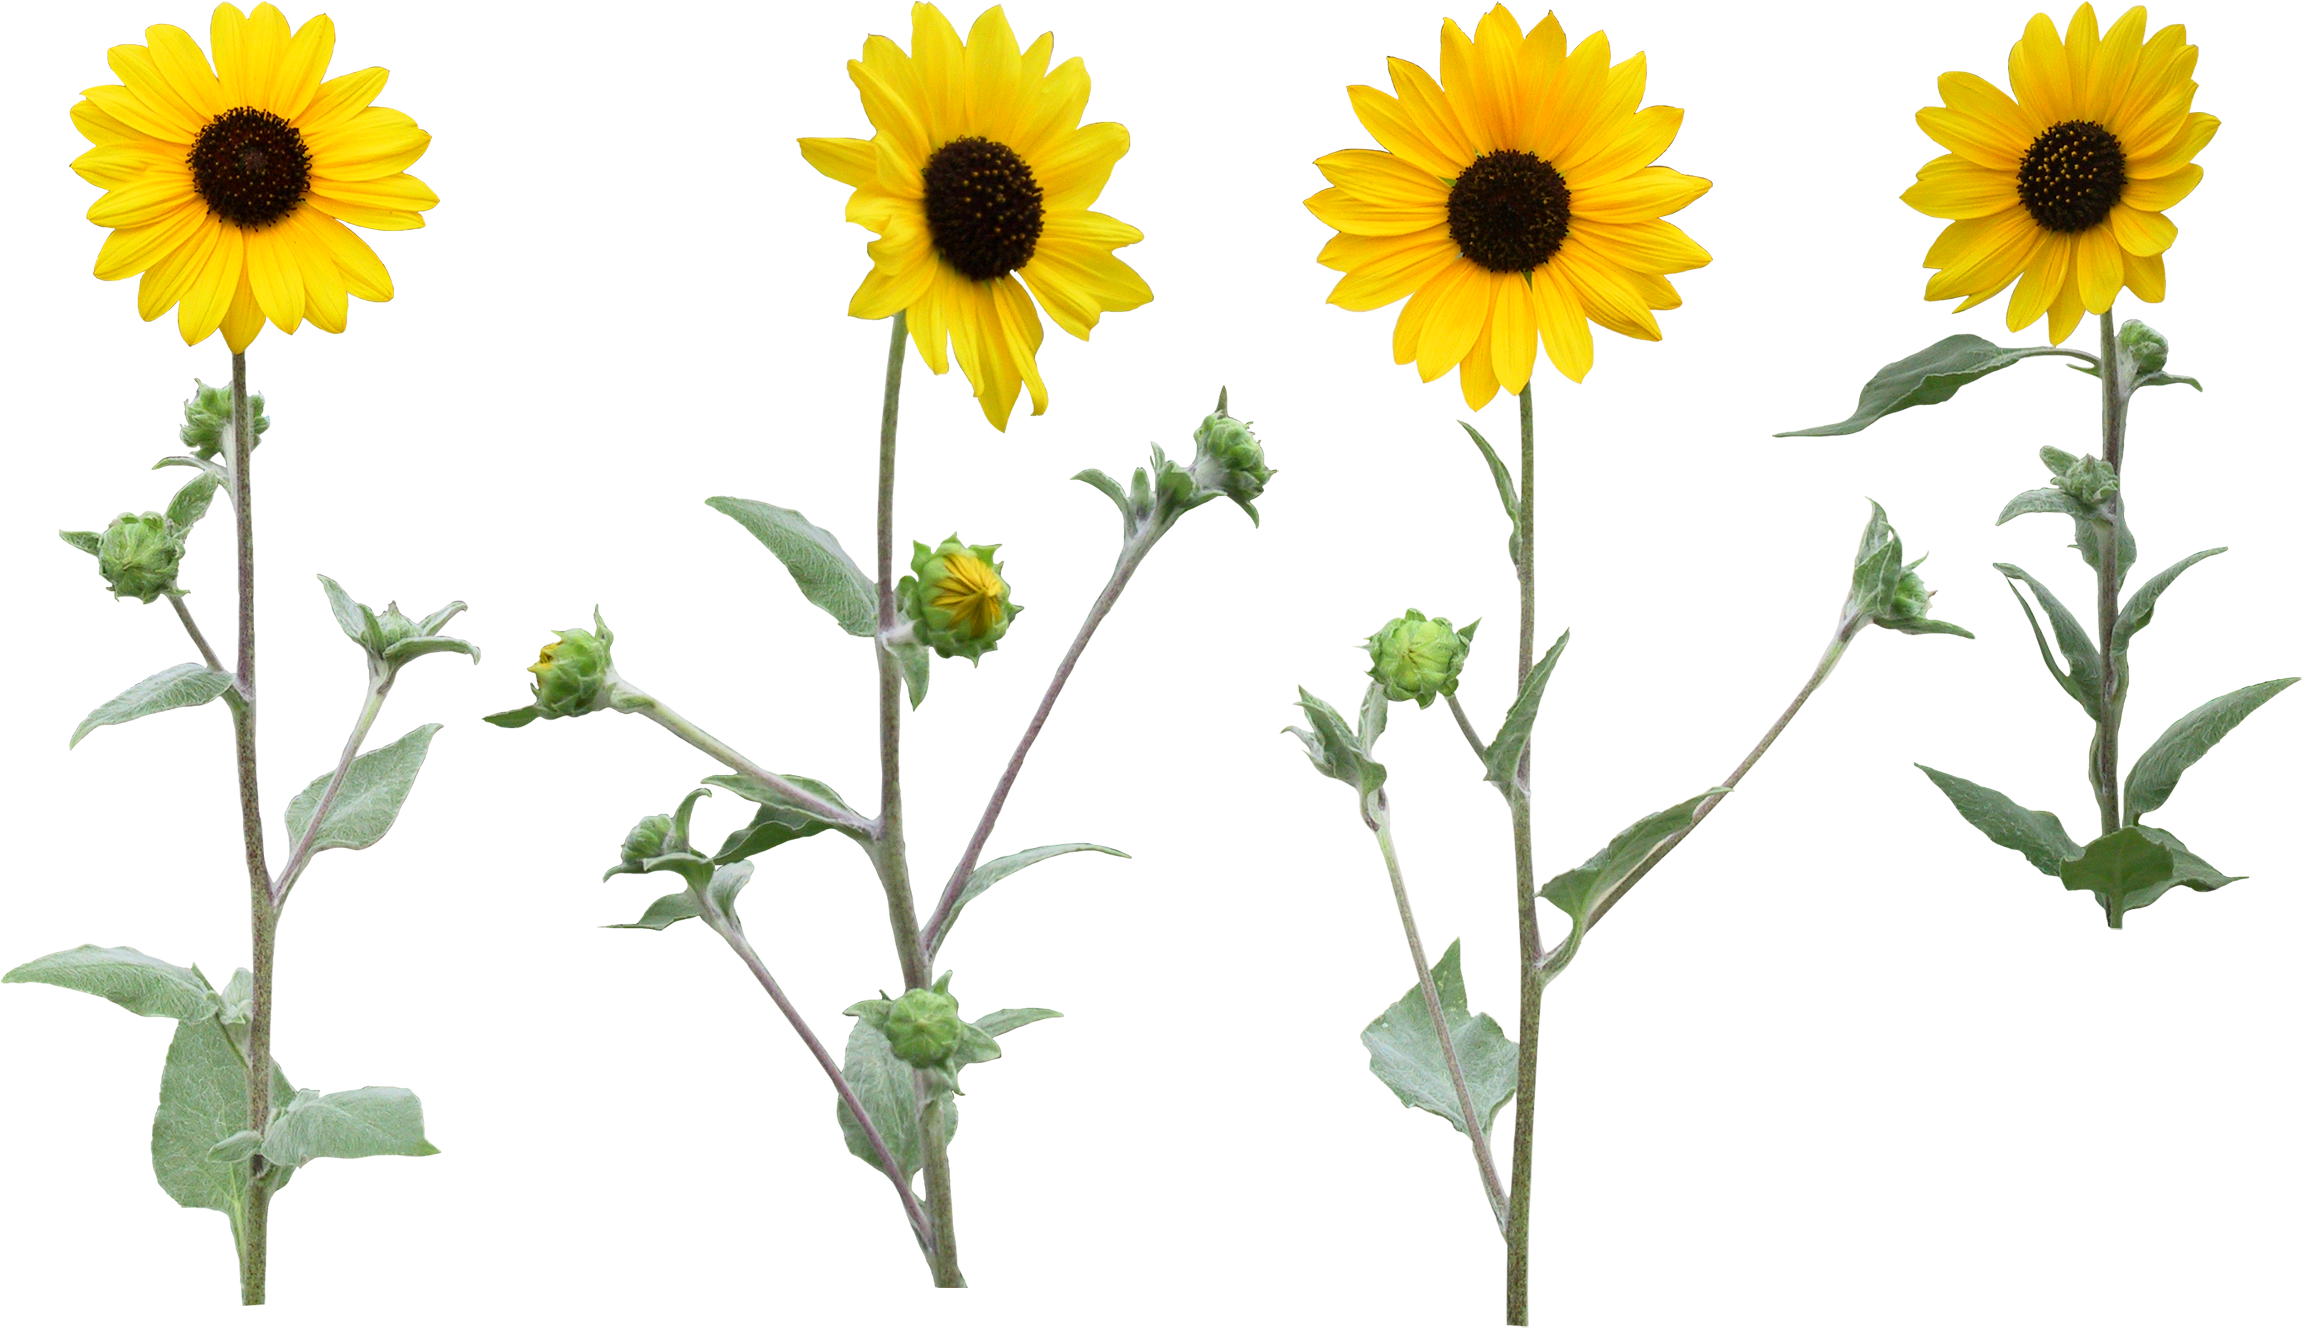 Single Sunfloer Png With Leaf - Sun Flowers Png Transparent Background (2416x1492)